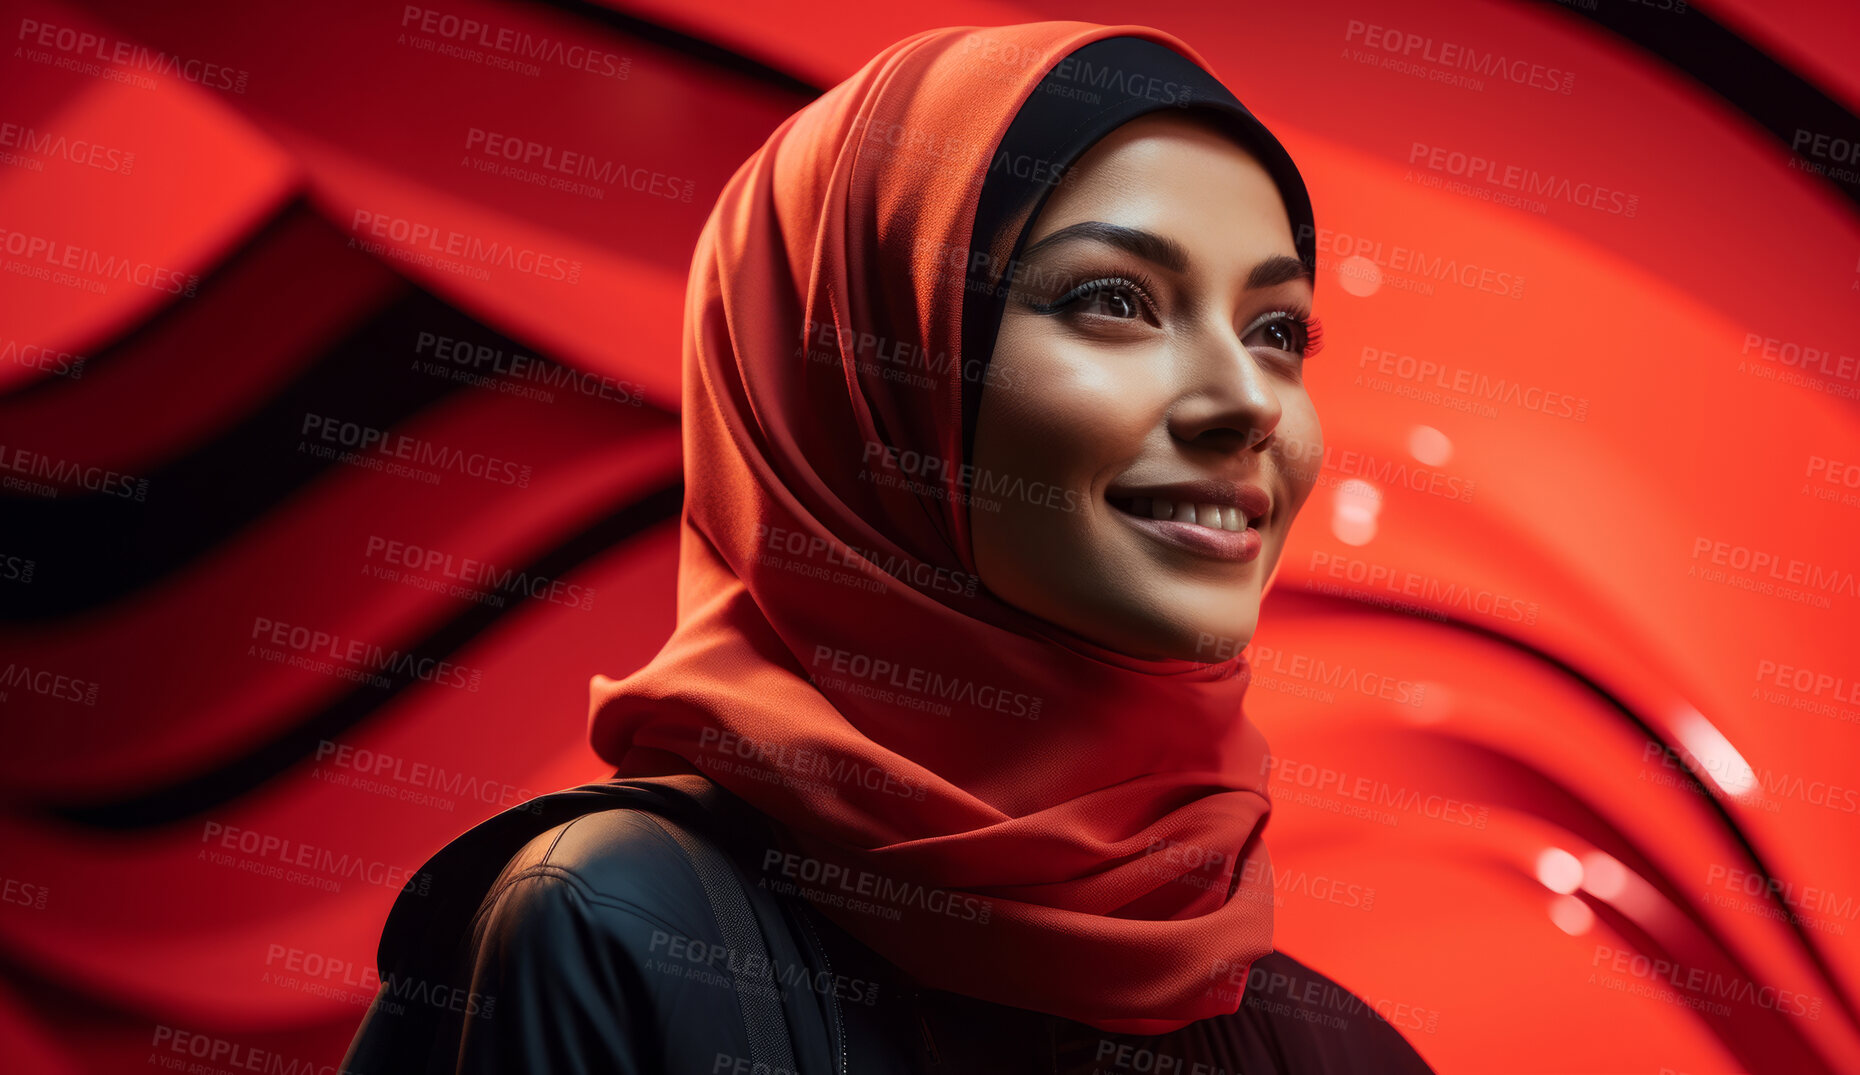 Buy stock photo close up portrait of beautiful muslim woman wearing vibrant red scarf. Religion concept.